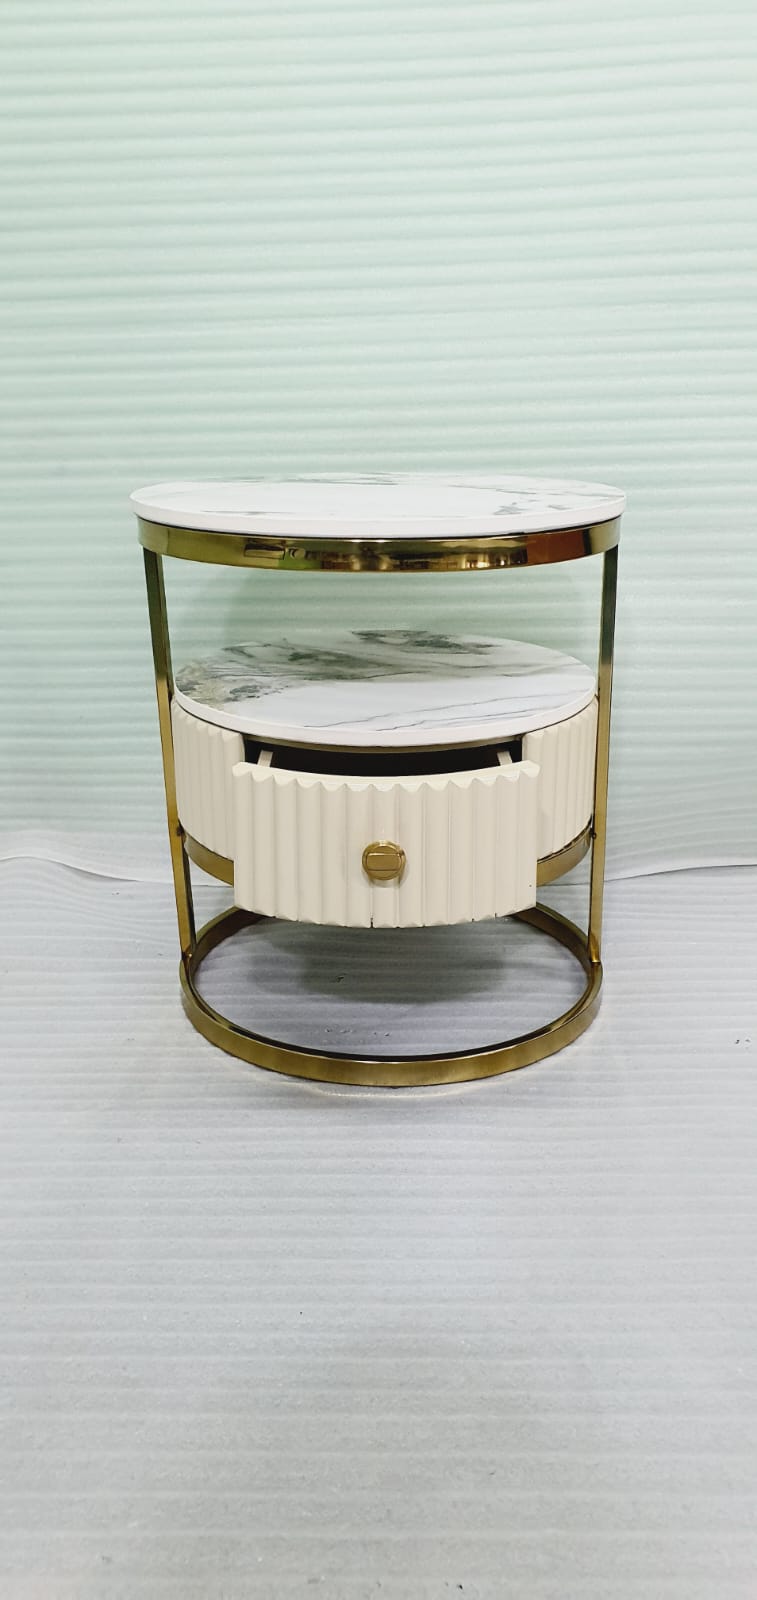 Stainless Steel Side Table With Storage